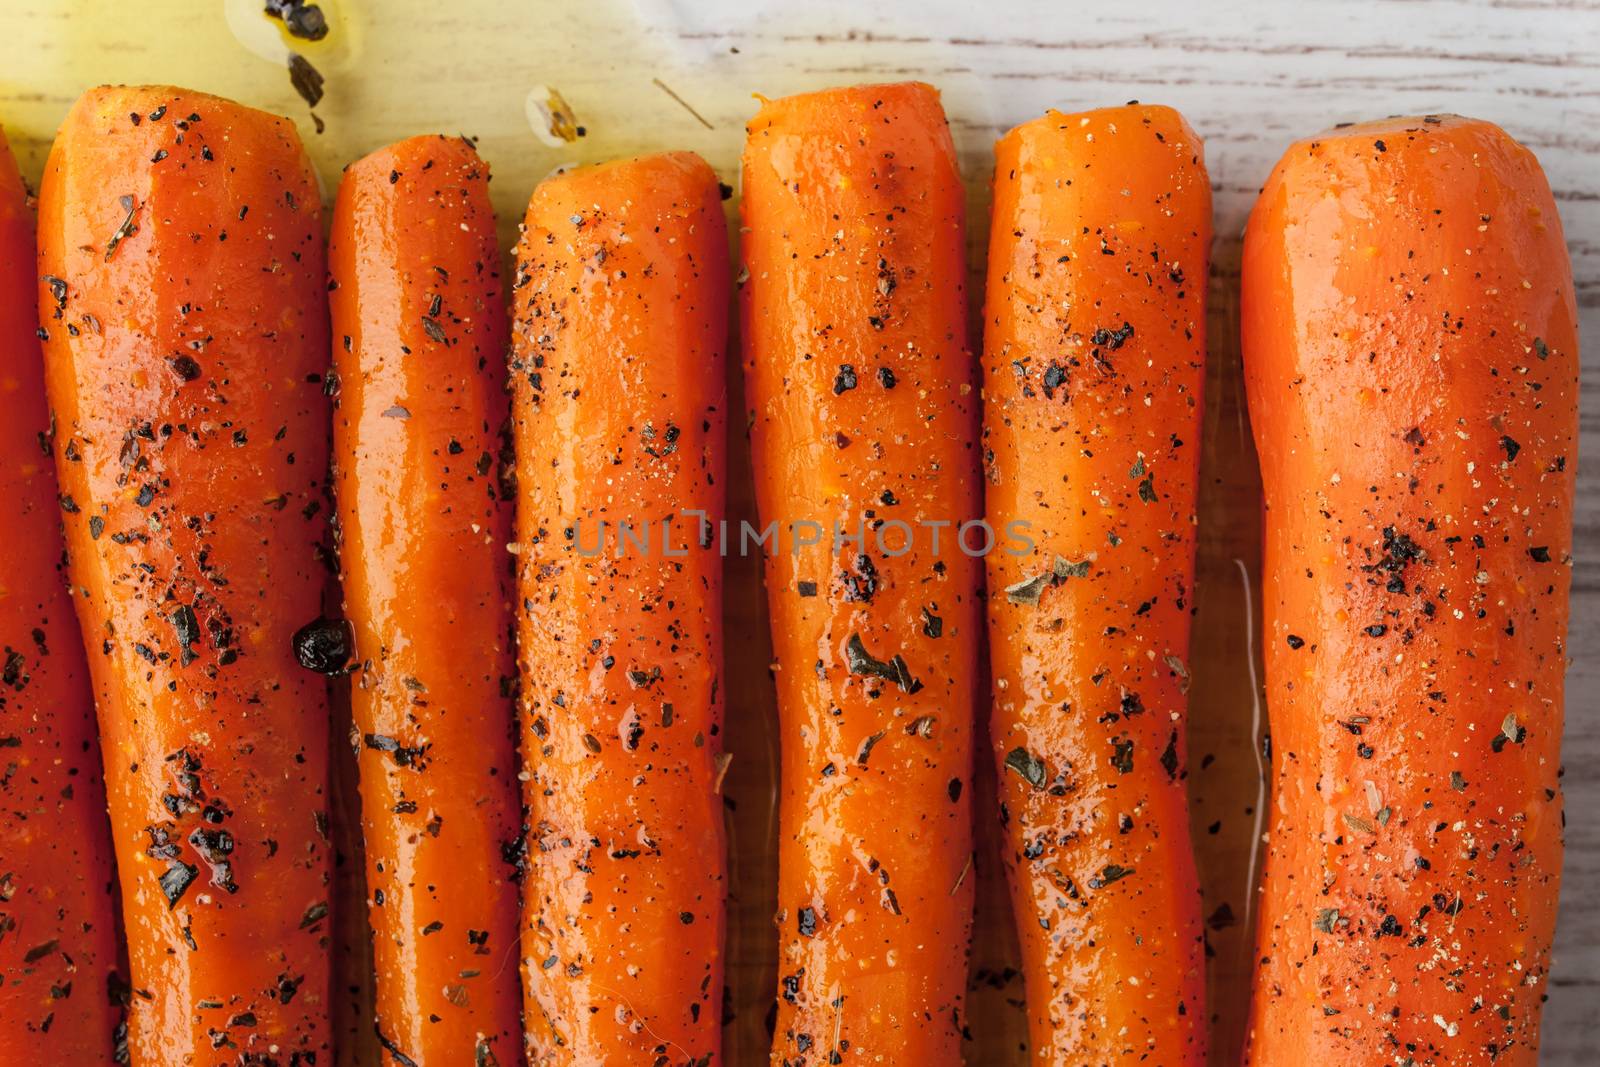 Baked carrots with herbs by Deniskarpenkov